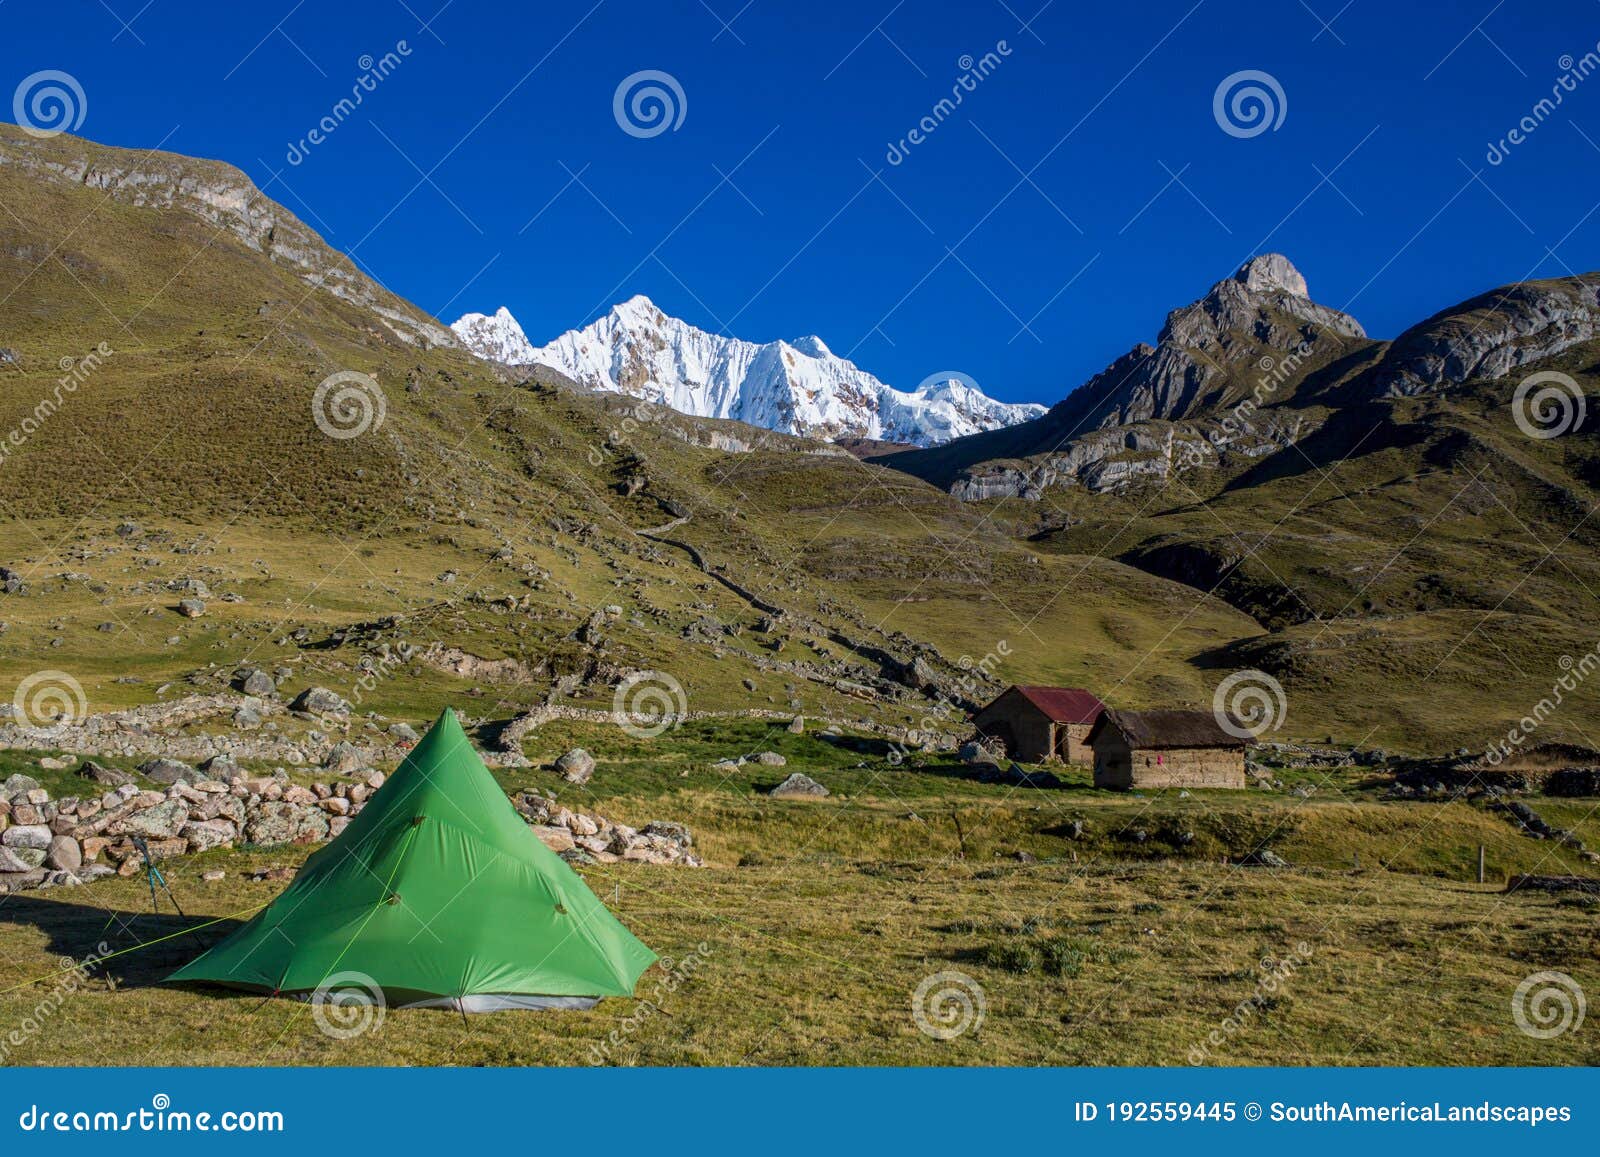 green tent in an empty camping at the bottom of beautiful snow mountain